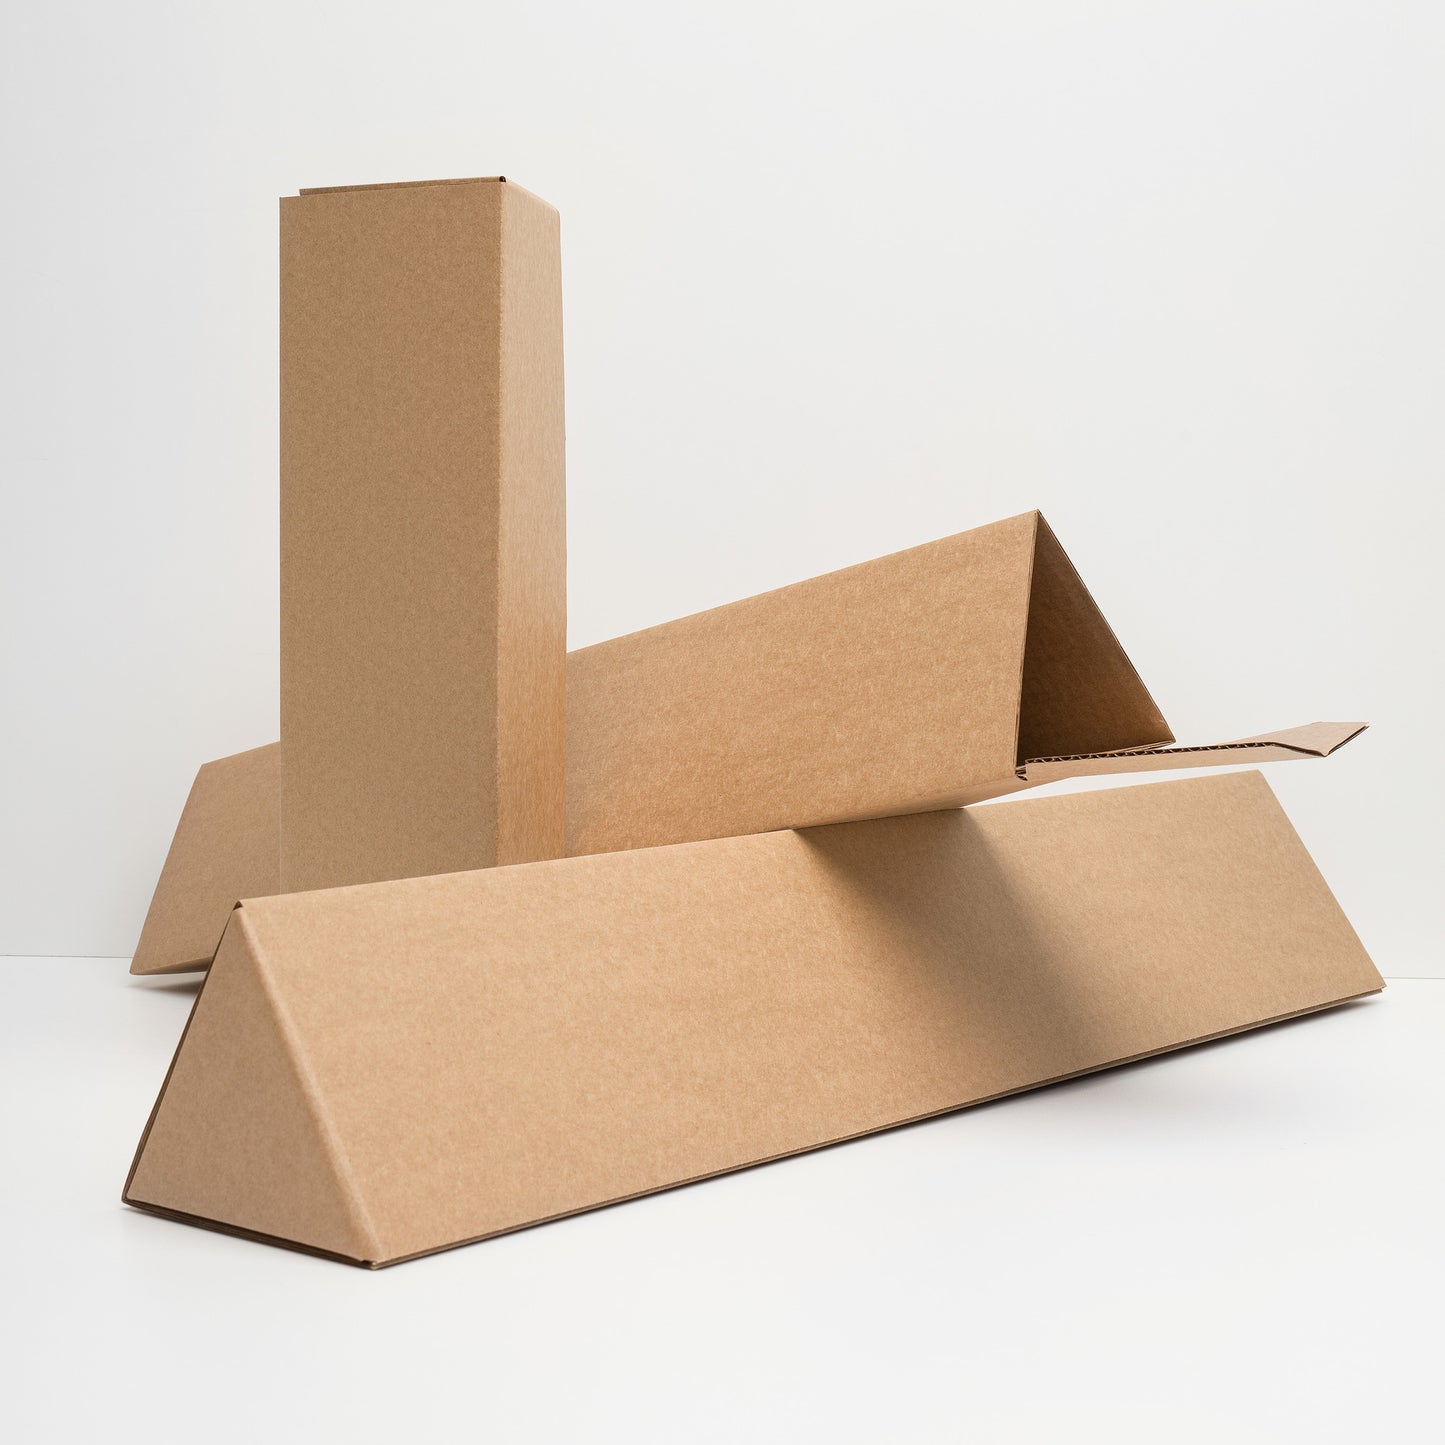 Triangular cardboard shipping tube to provide optimal protection of art print during shipping.